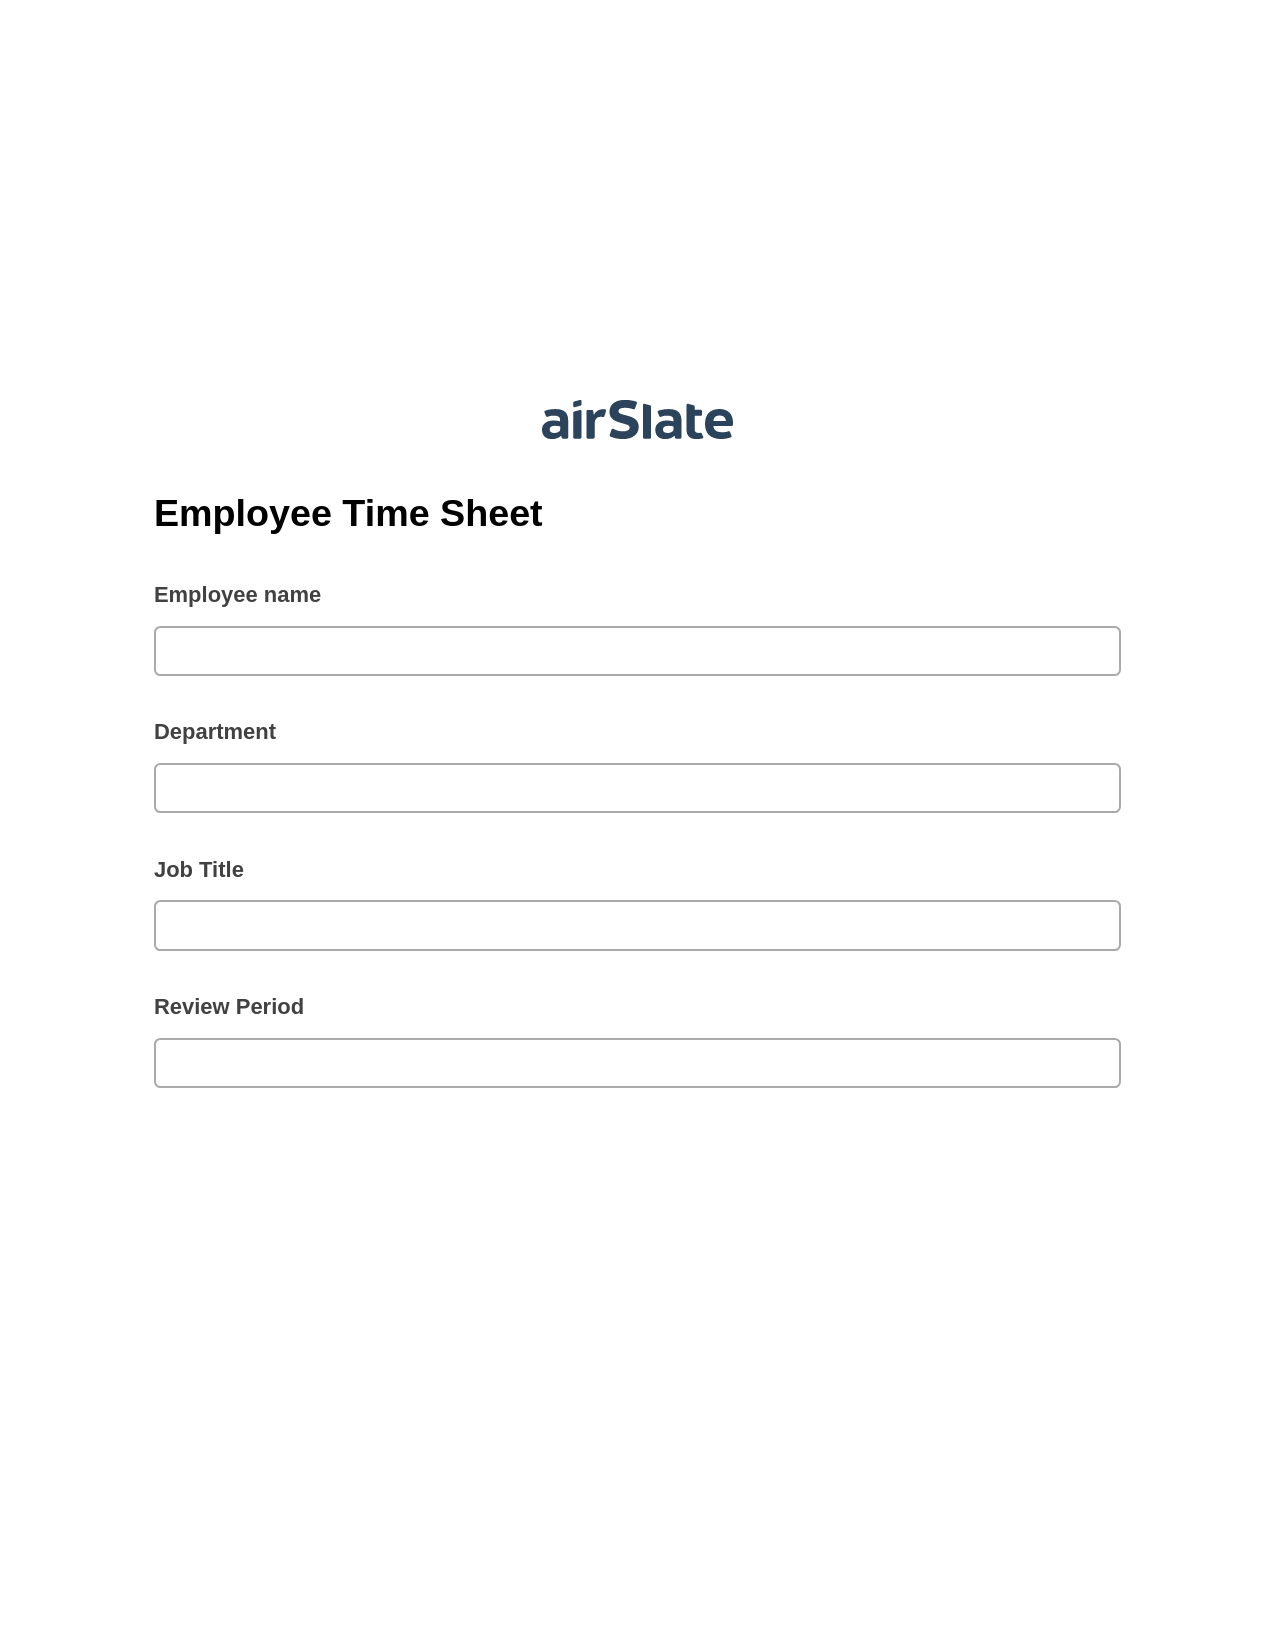 Employee Time Sheet Pre-fill from Salesforce Records with SOQL Bot, Create slate addon, Export to NetSuite Bot